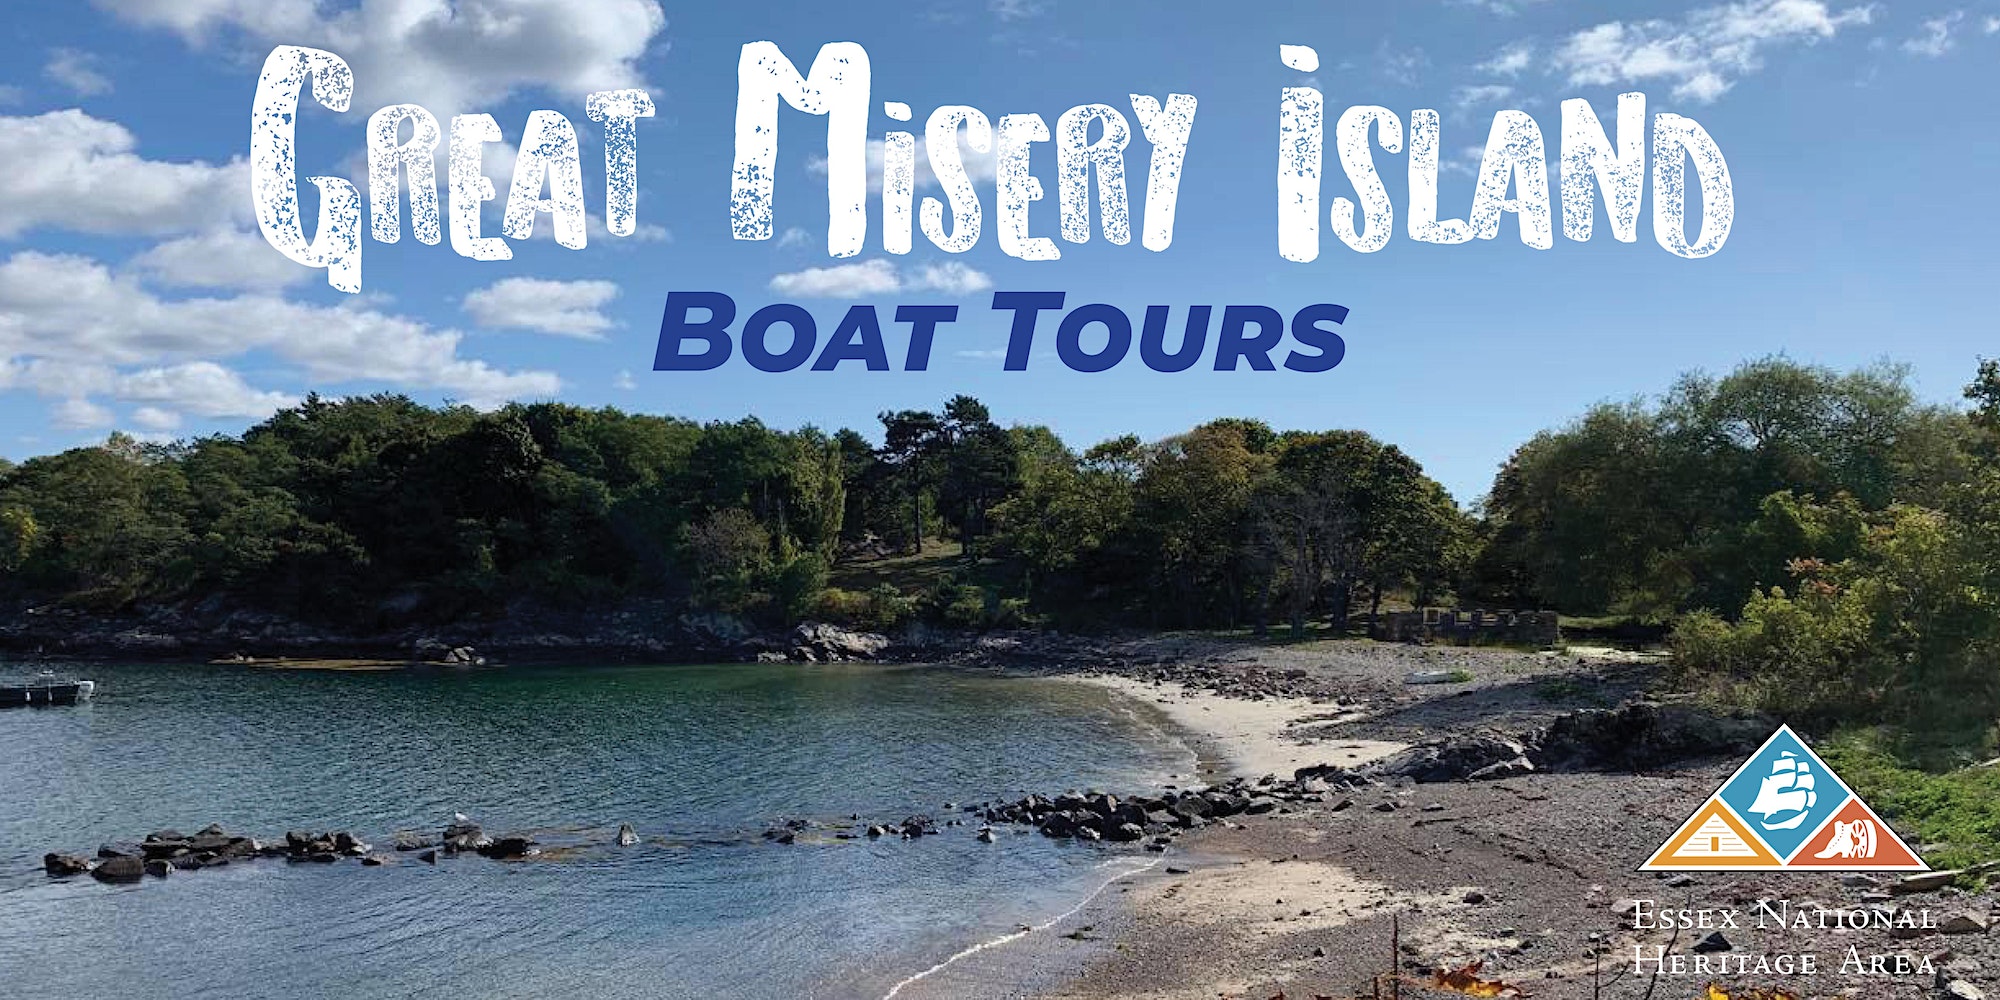 a picture of a boat in the water with the words great mystery island boat tours.